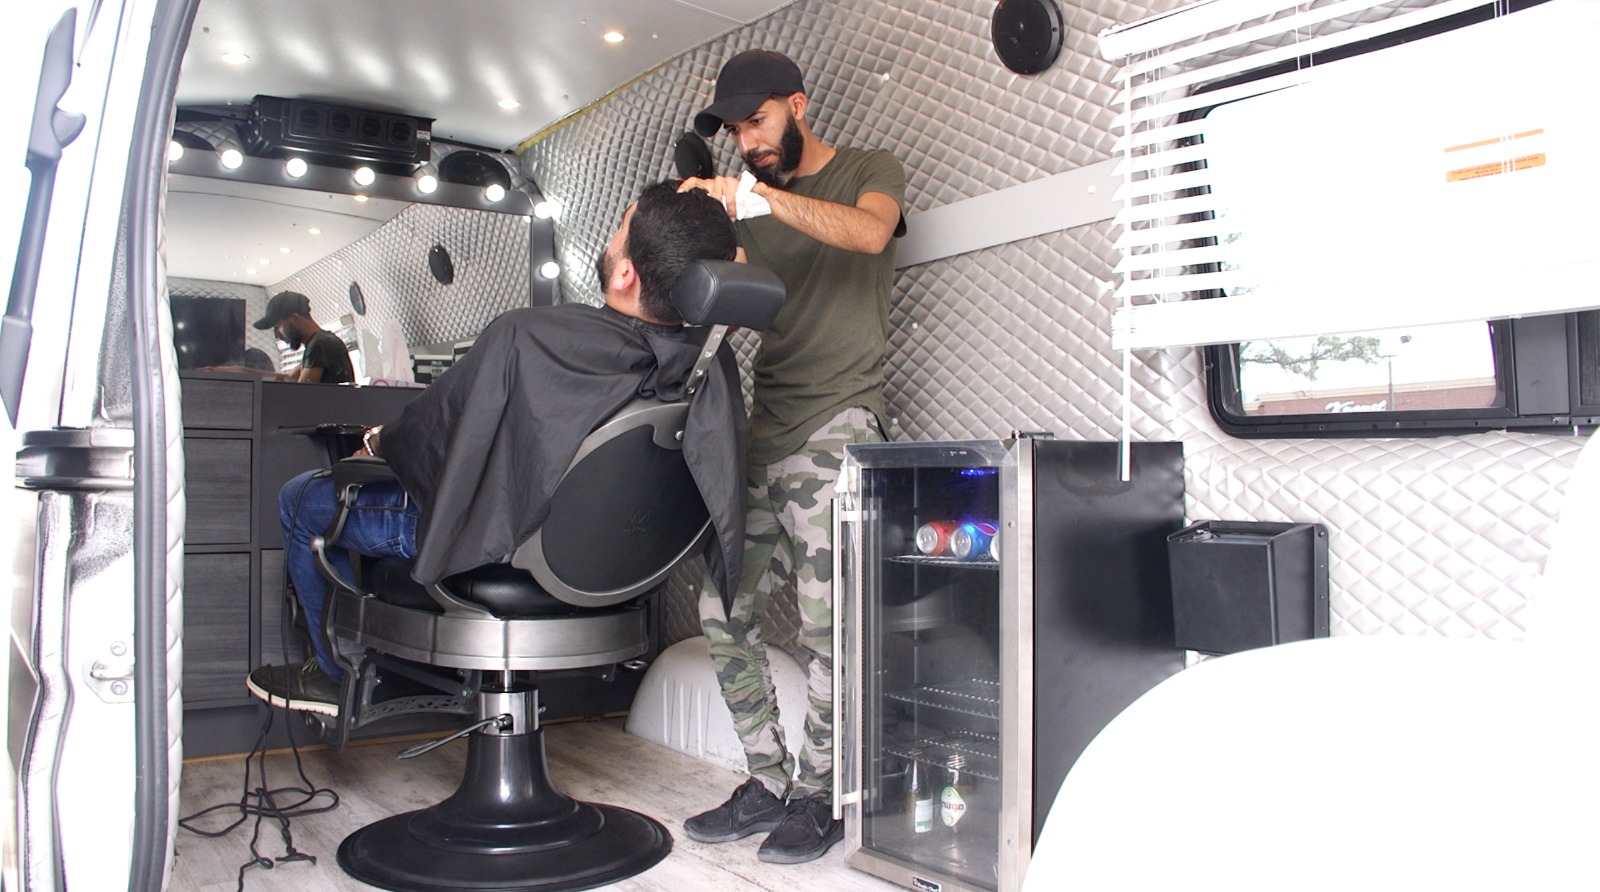 Iraqi immigrant brings innovative mobile barber business ... - Dearborn